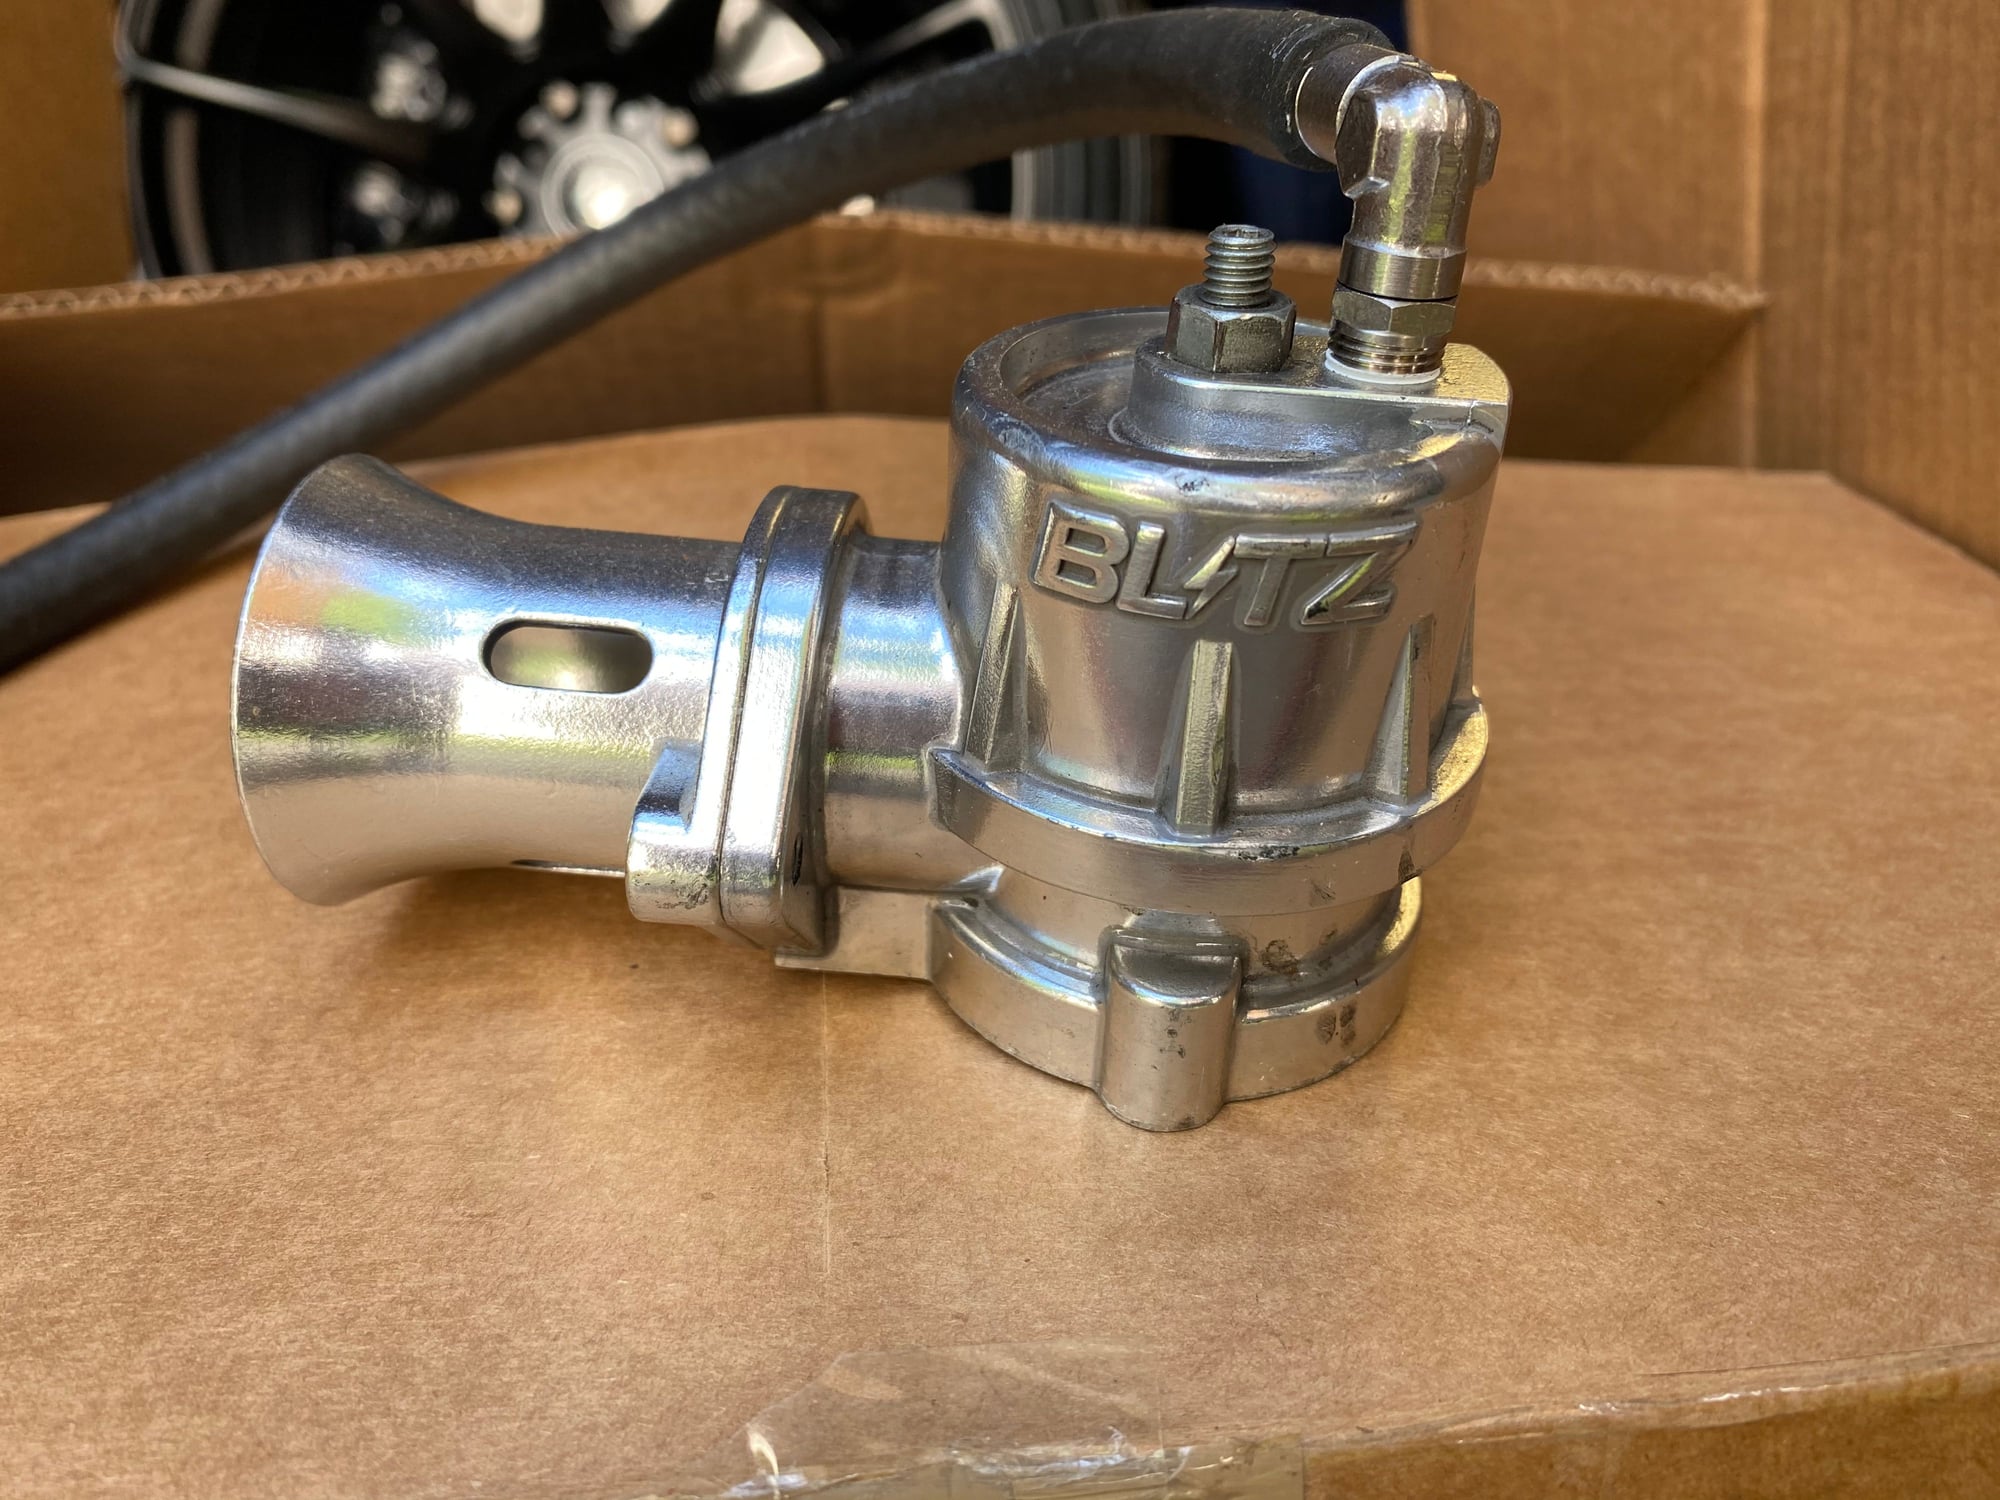 Miscellaneous - Authentic Blitz BOv very clean excellent condition old School JDM - Used - 1986 to 1991 Mazda RX-7 - Prince Frederick, MD 20678, United States